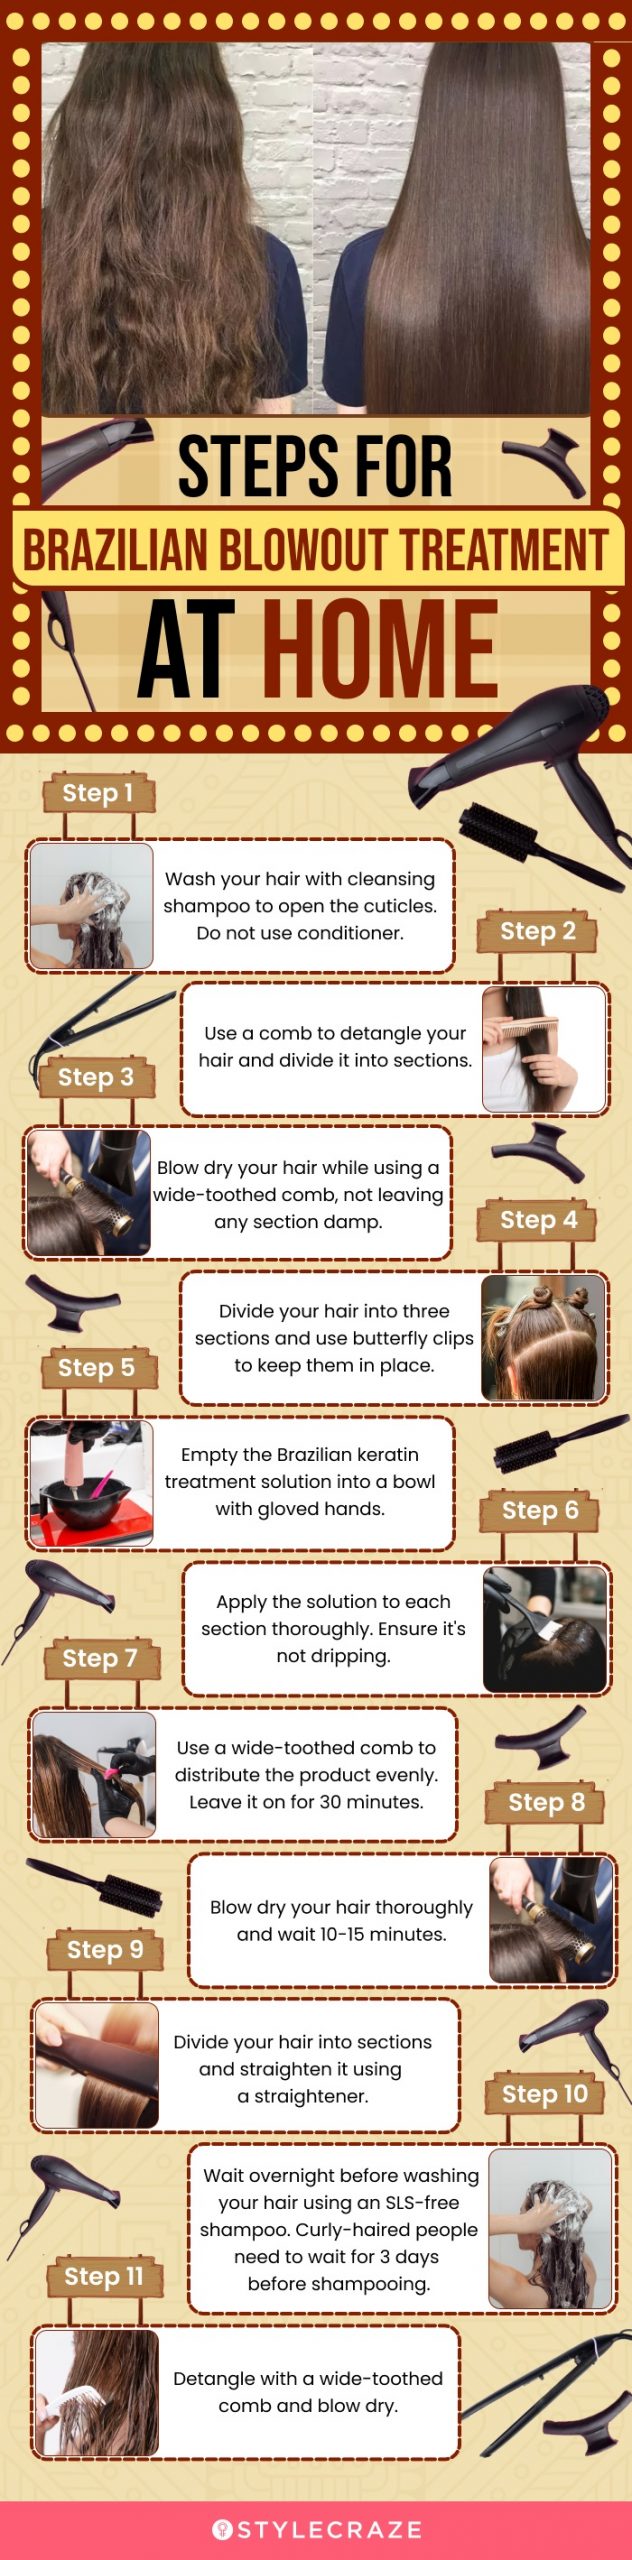 What Is Brazilian Blowout? How To Do It At Home (Tutorial)